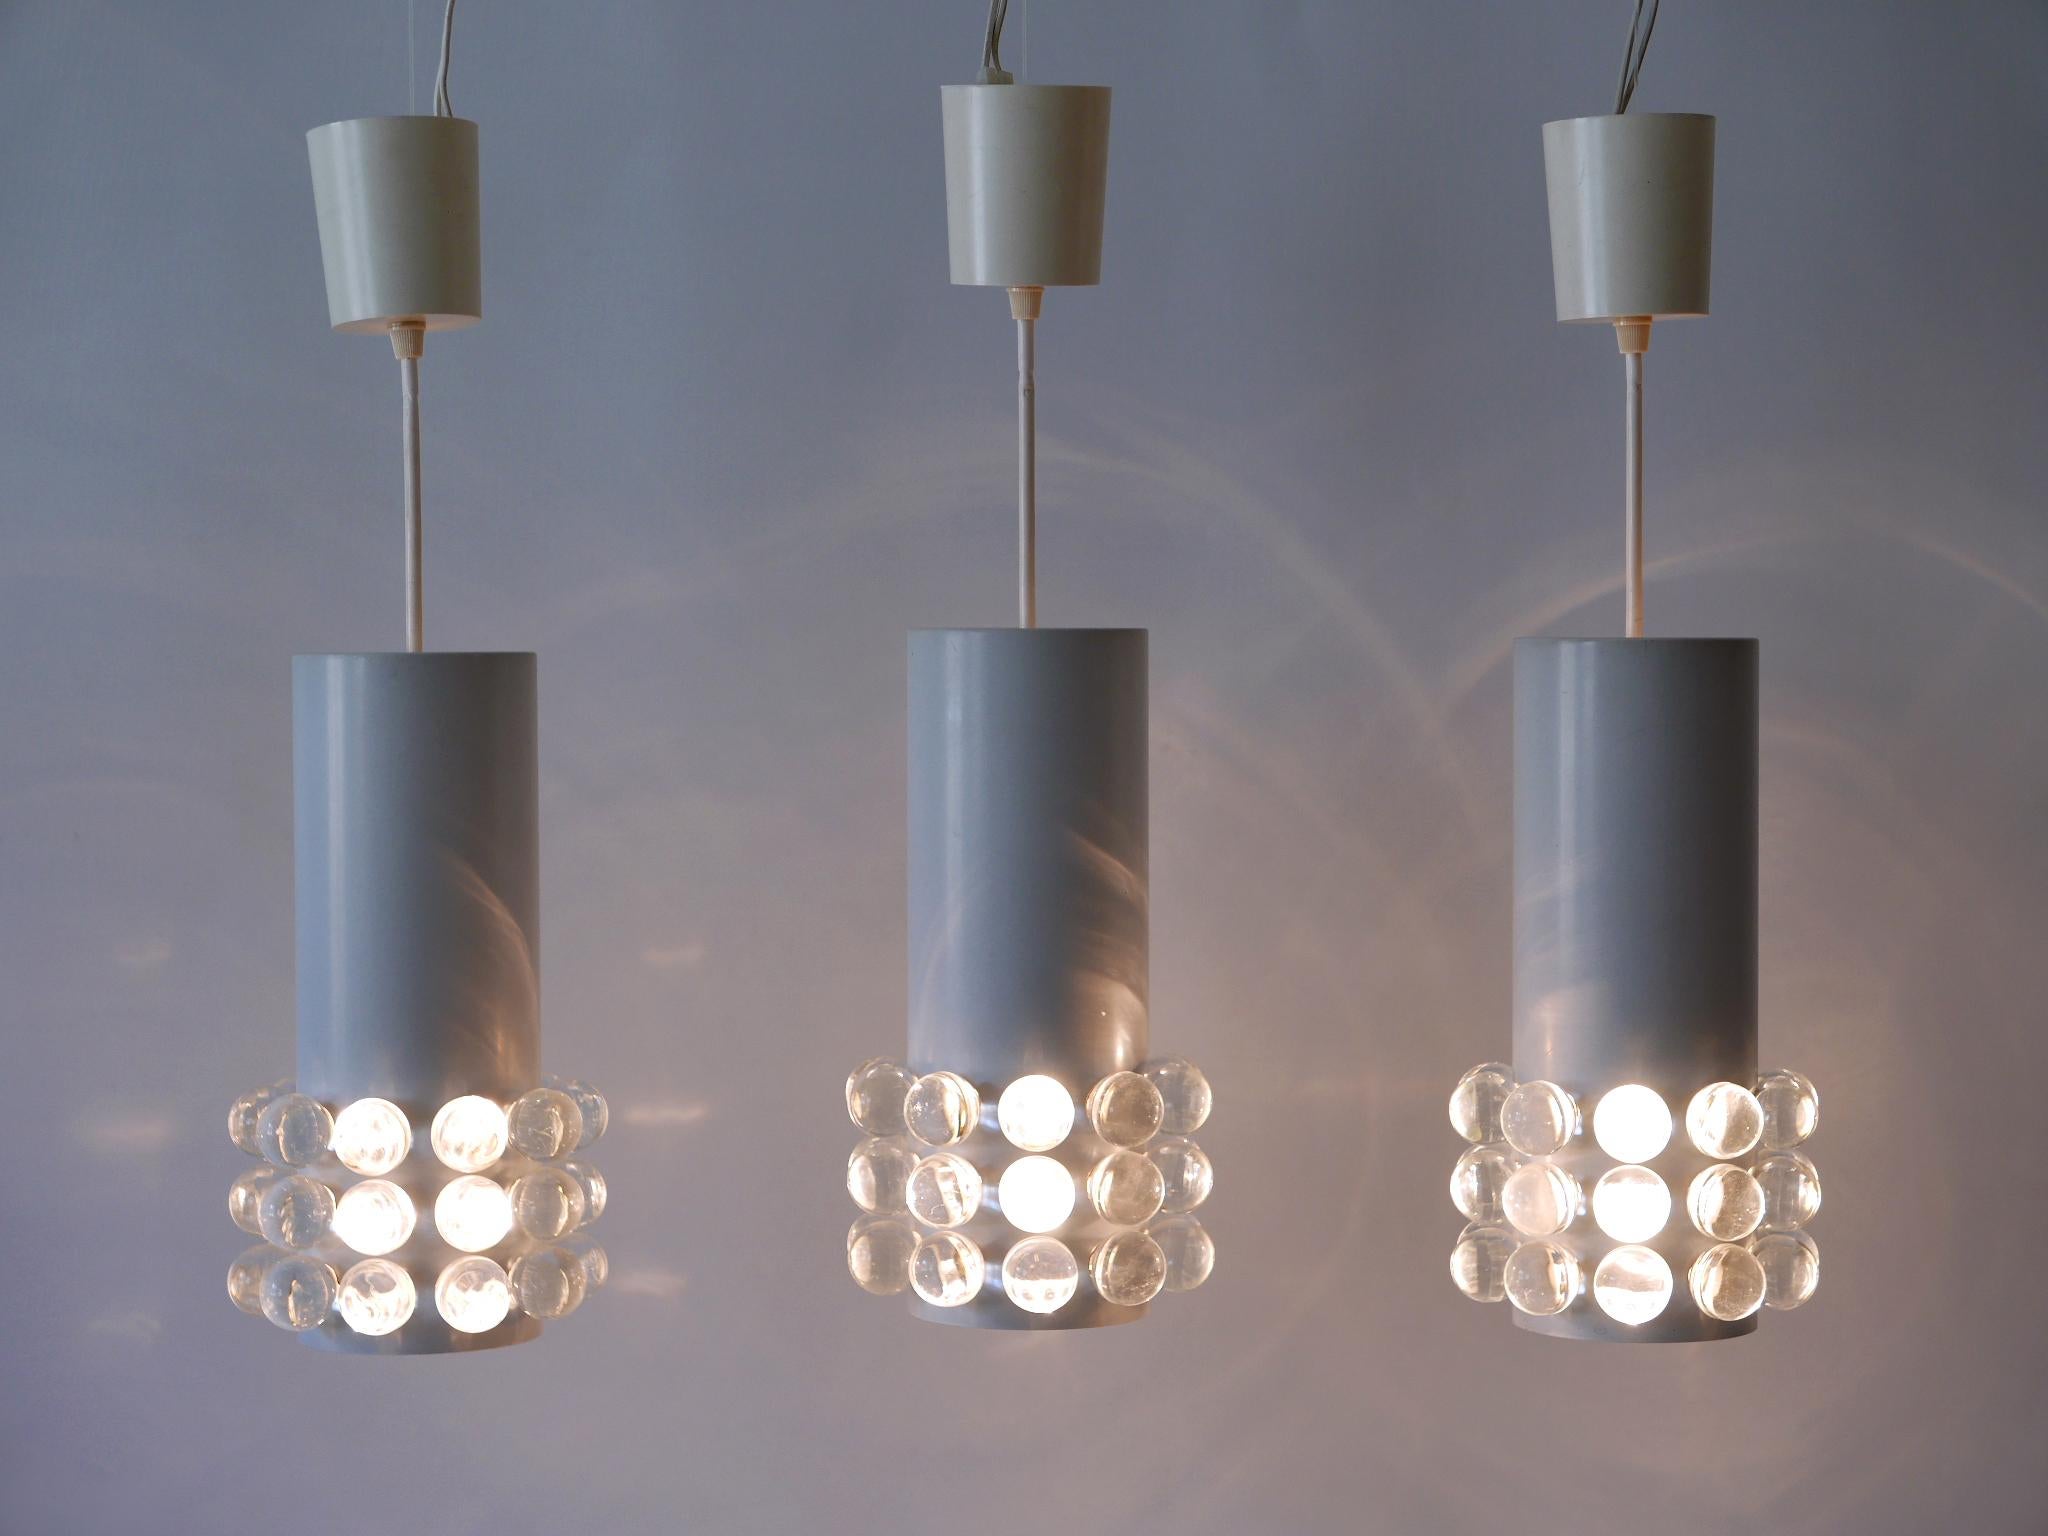 Set of three rare, lovely and highly decorative Mid-Century Modern pendant lamps or hanging lights with large glass cabochons. Designed and manufactured in Germany, 1960s.

Executed in metal and glass, each pendant lamp comes with 1 x E27 / E26